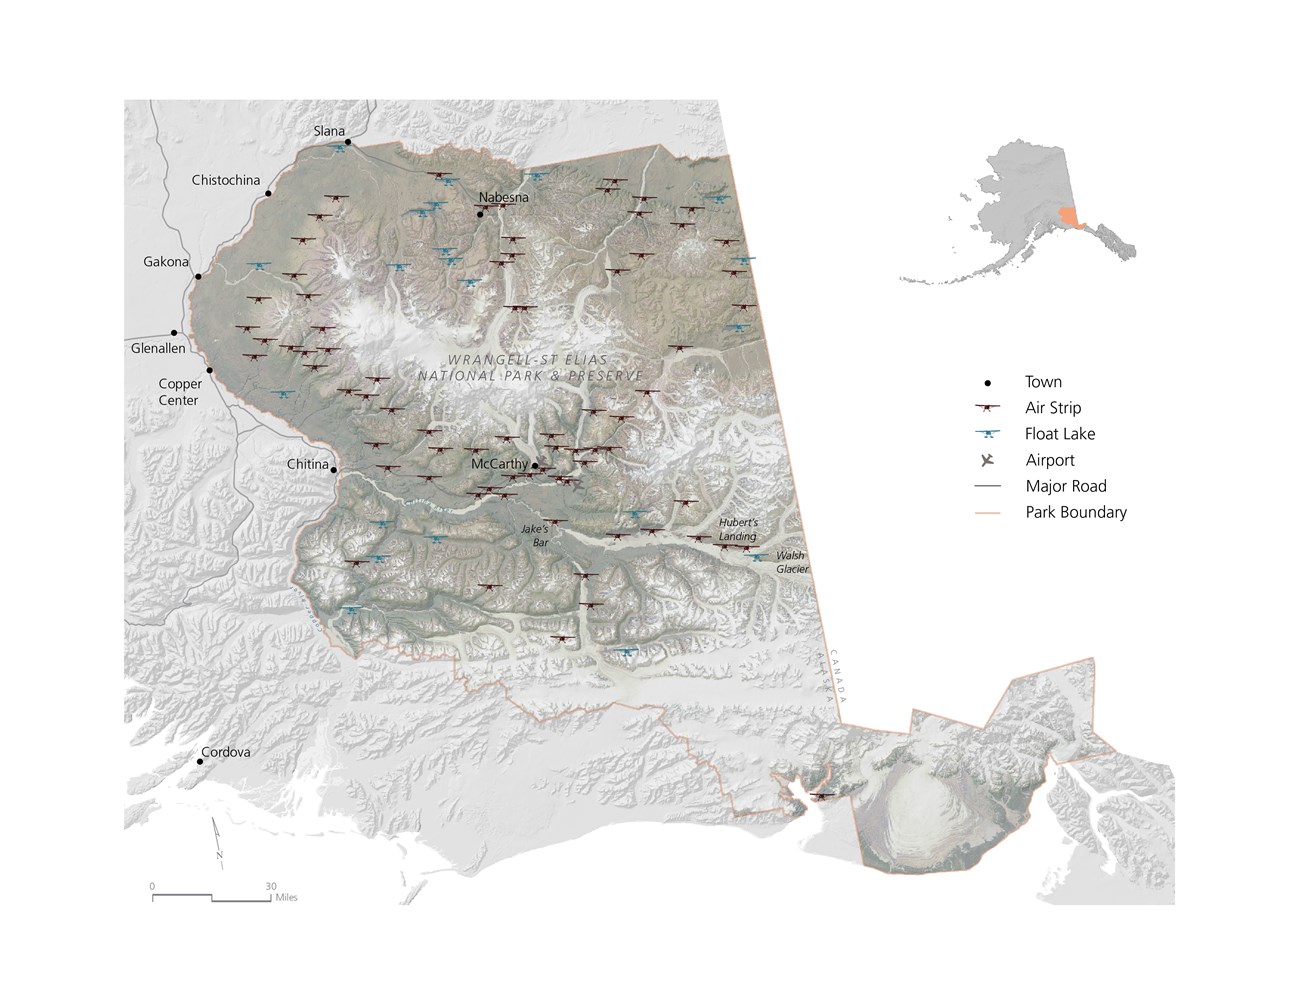 Map of landing sites in Wrangell-St. Elias with air strips, float lakes, and airports.